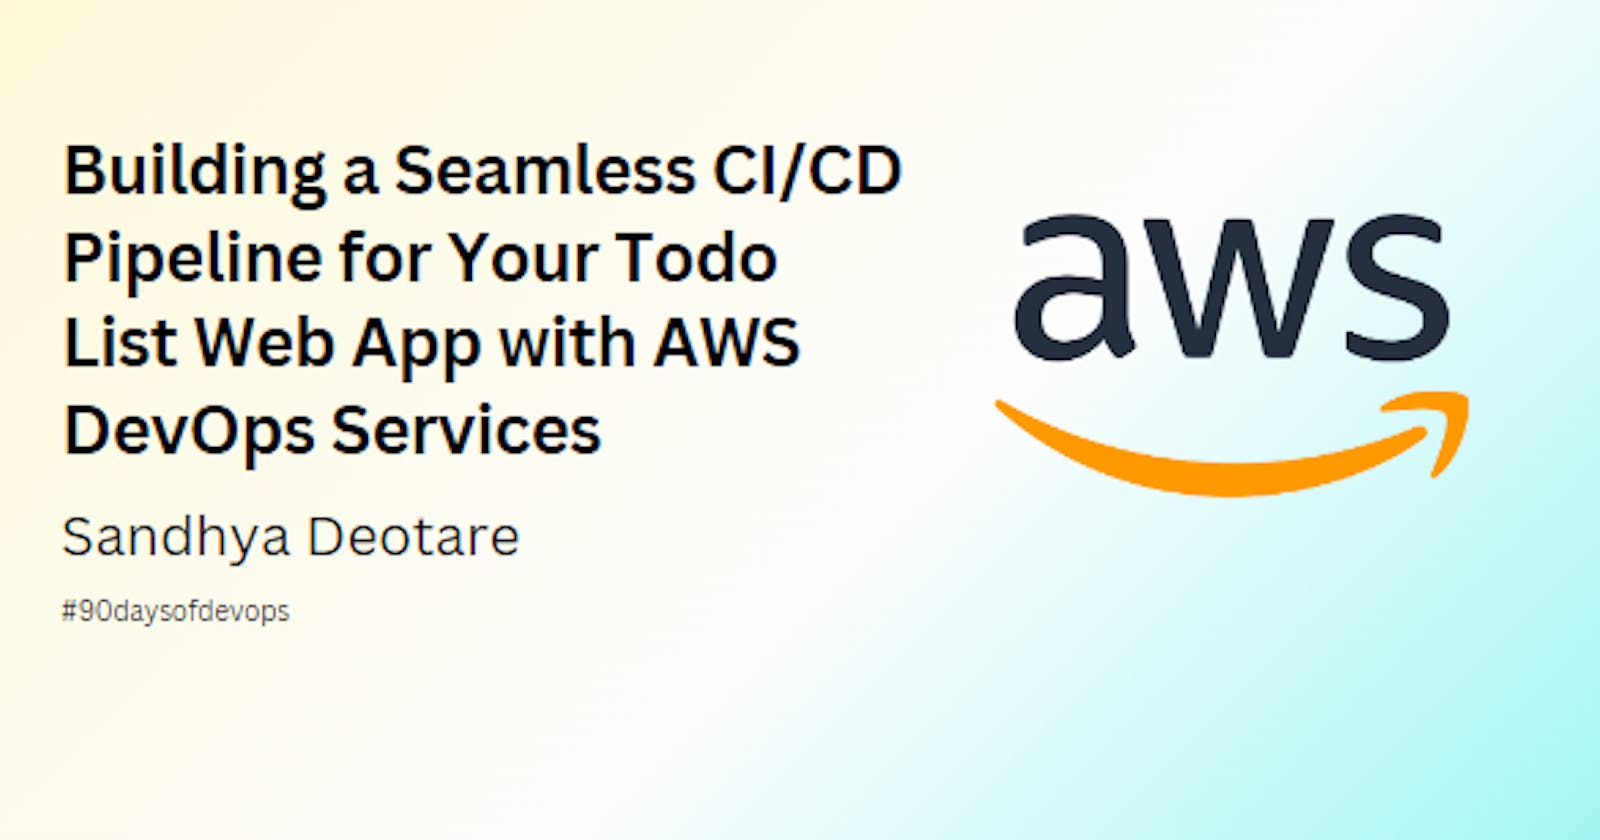 Building a Seamless CI/CD Pipeline for Your Todo List Web App with AWS DevOps Services